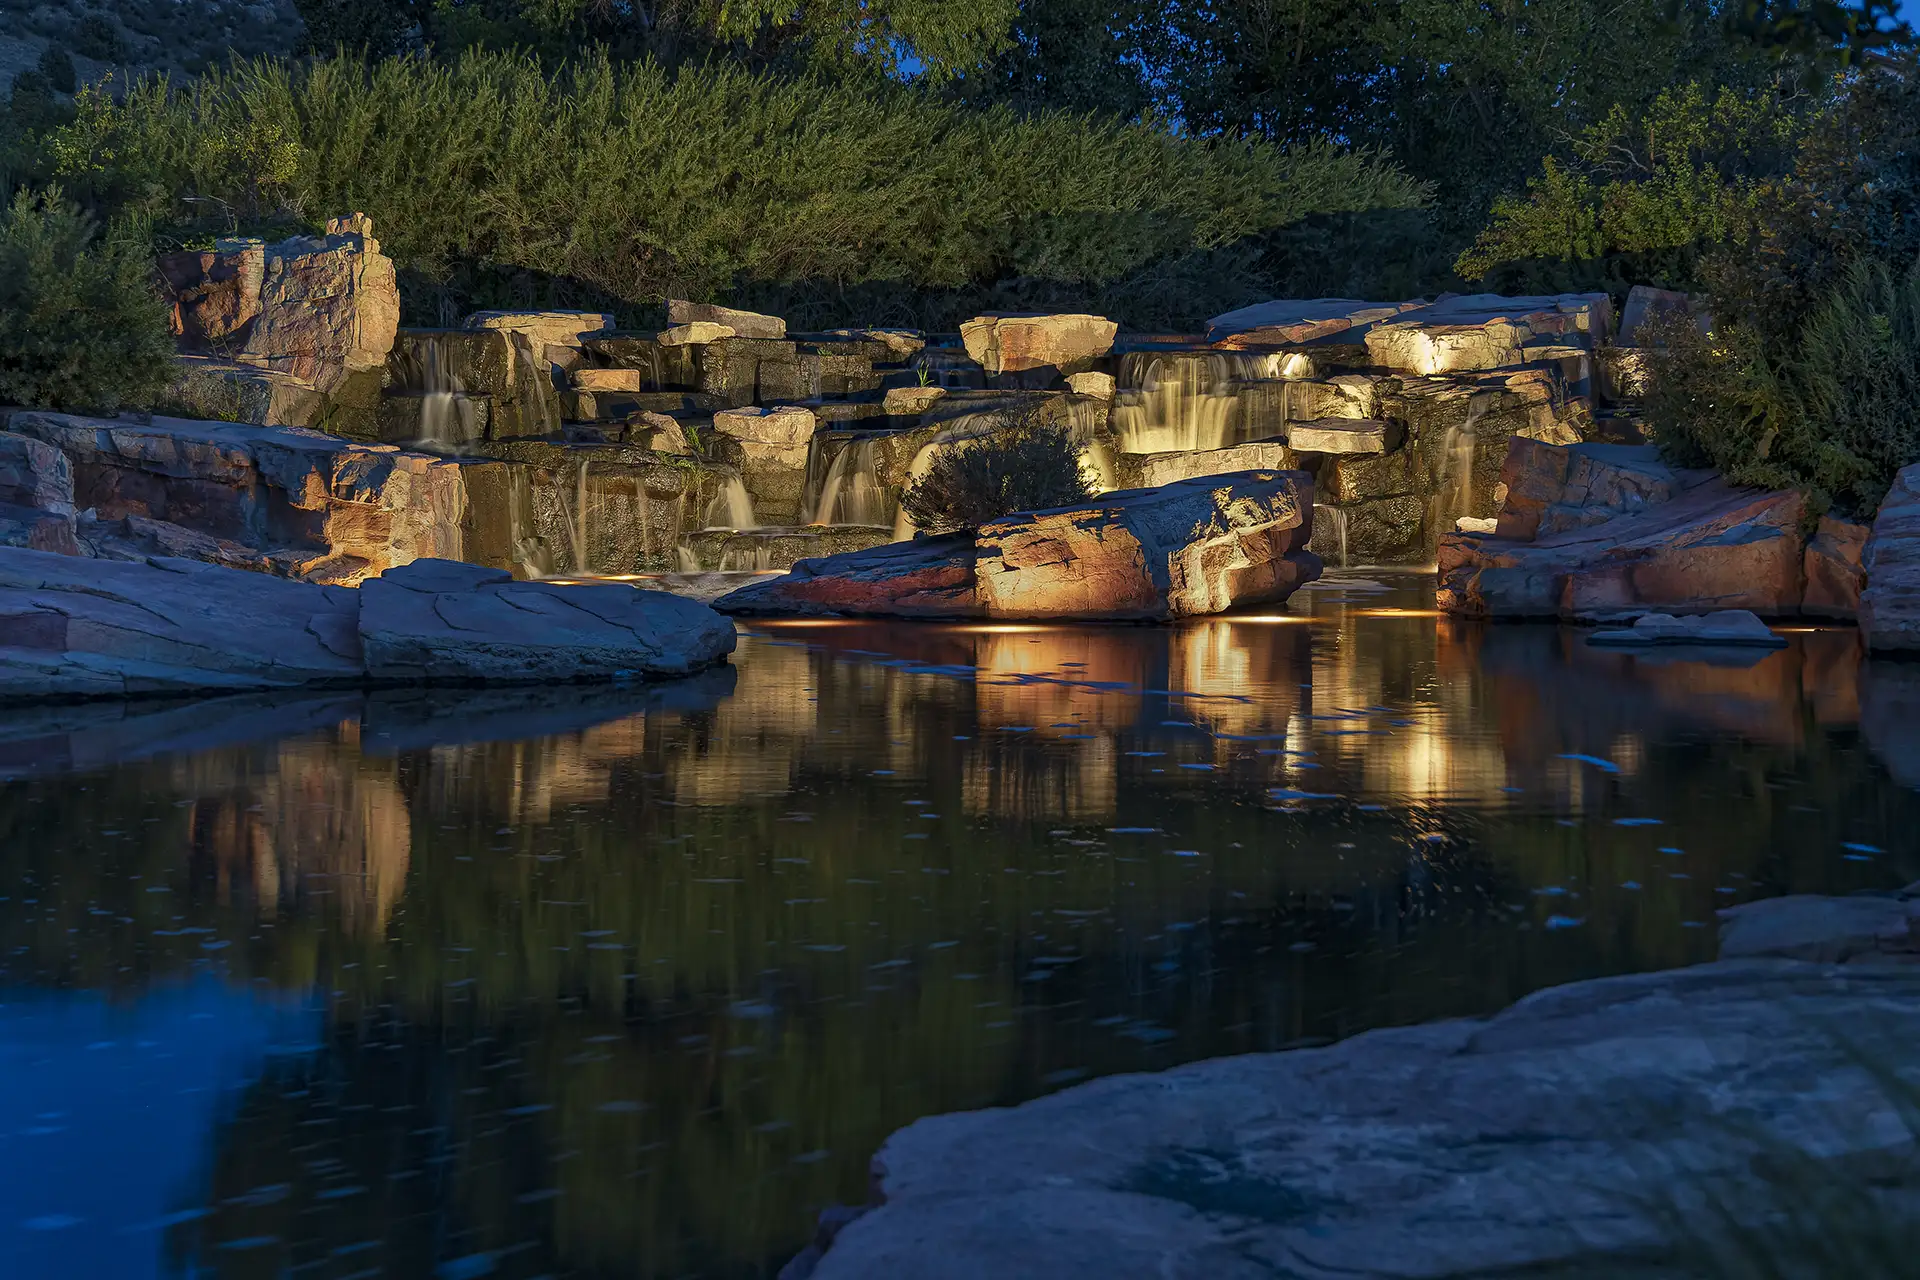 Ravenna image 1 waterfall Lighthouse Outdoor Lighting and Audio Denver CO